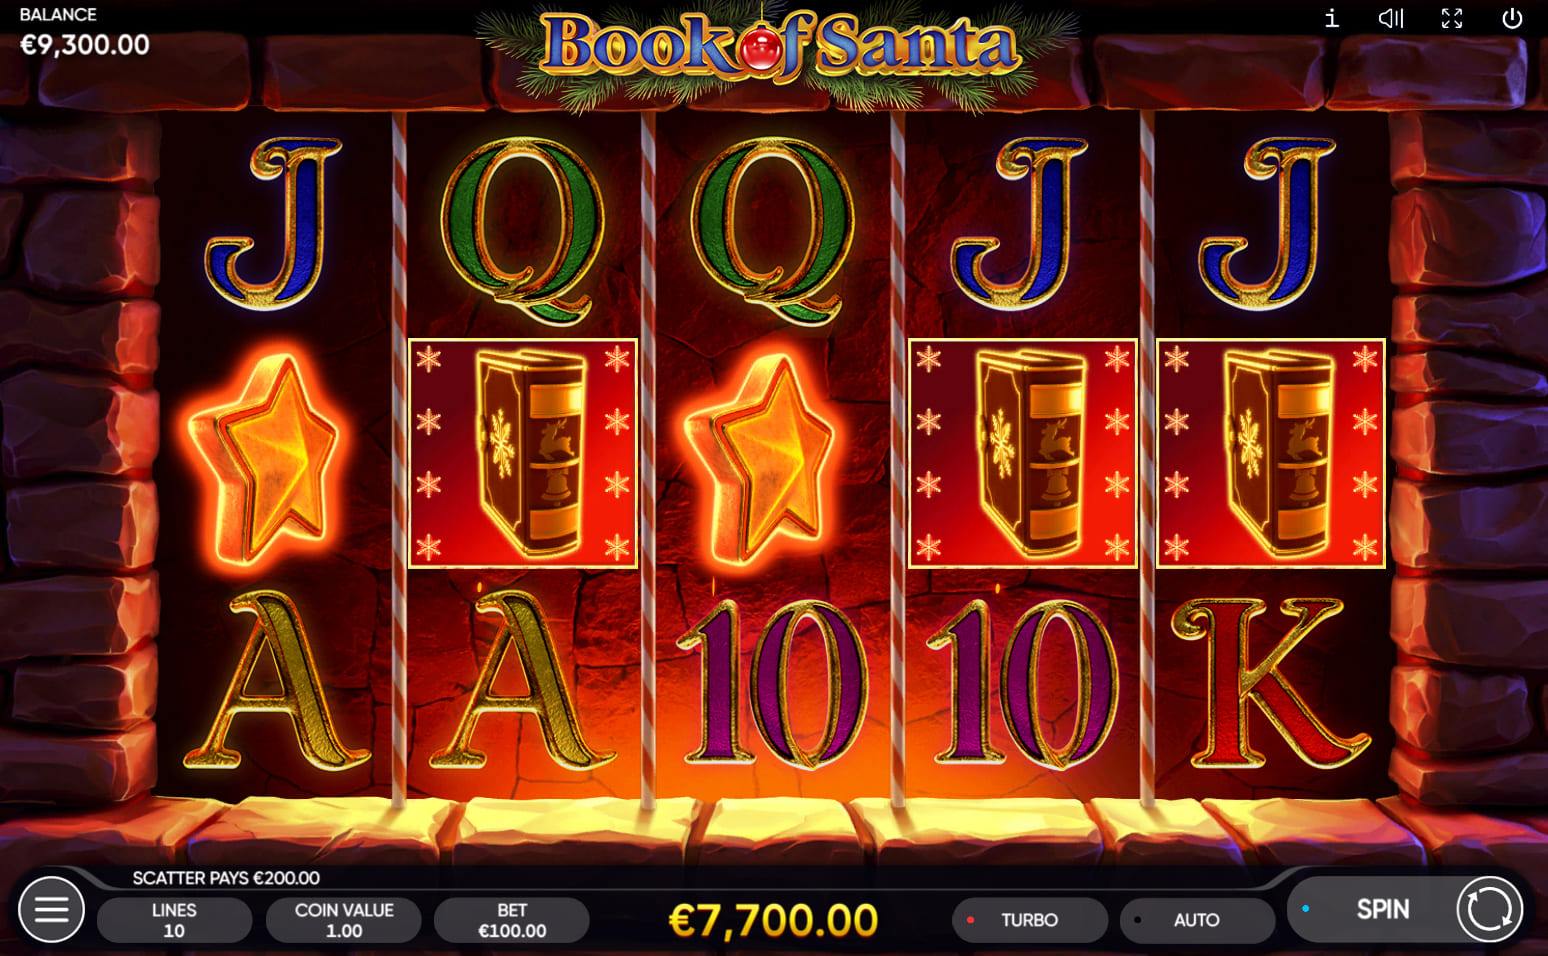 Book of Santa Video Slot Review by Casinoid.in